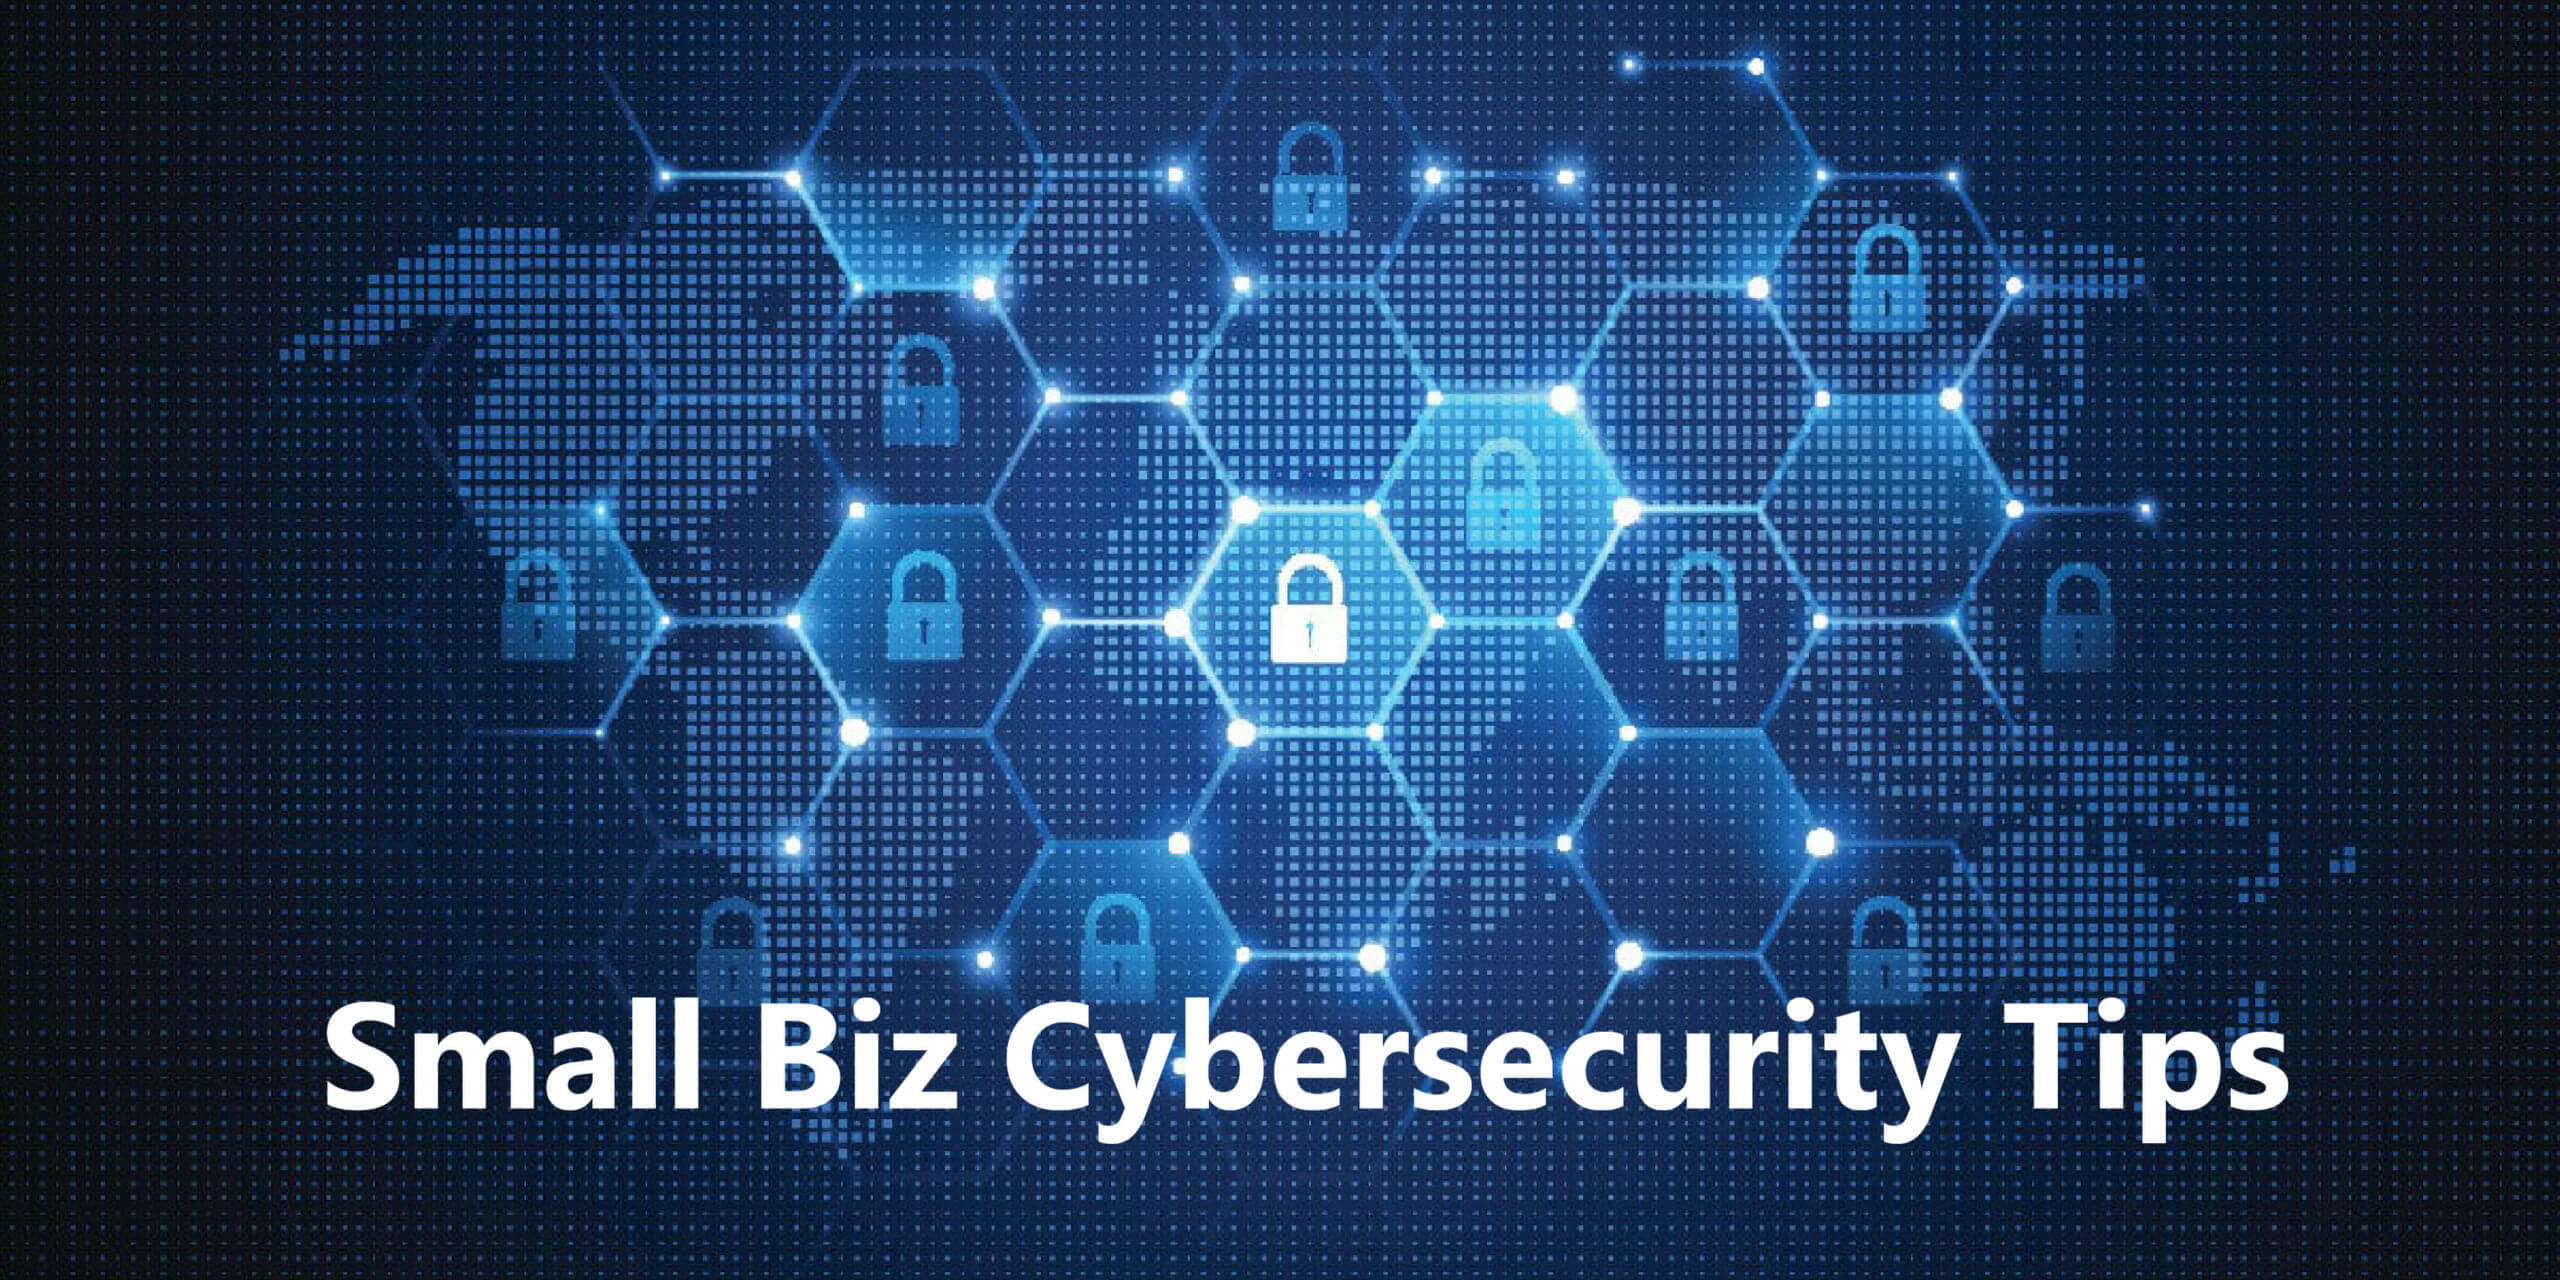 Small Biz Cybersecurity Tips 01 scaled